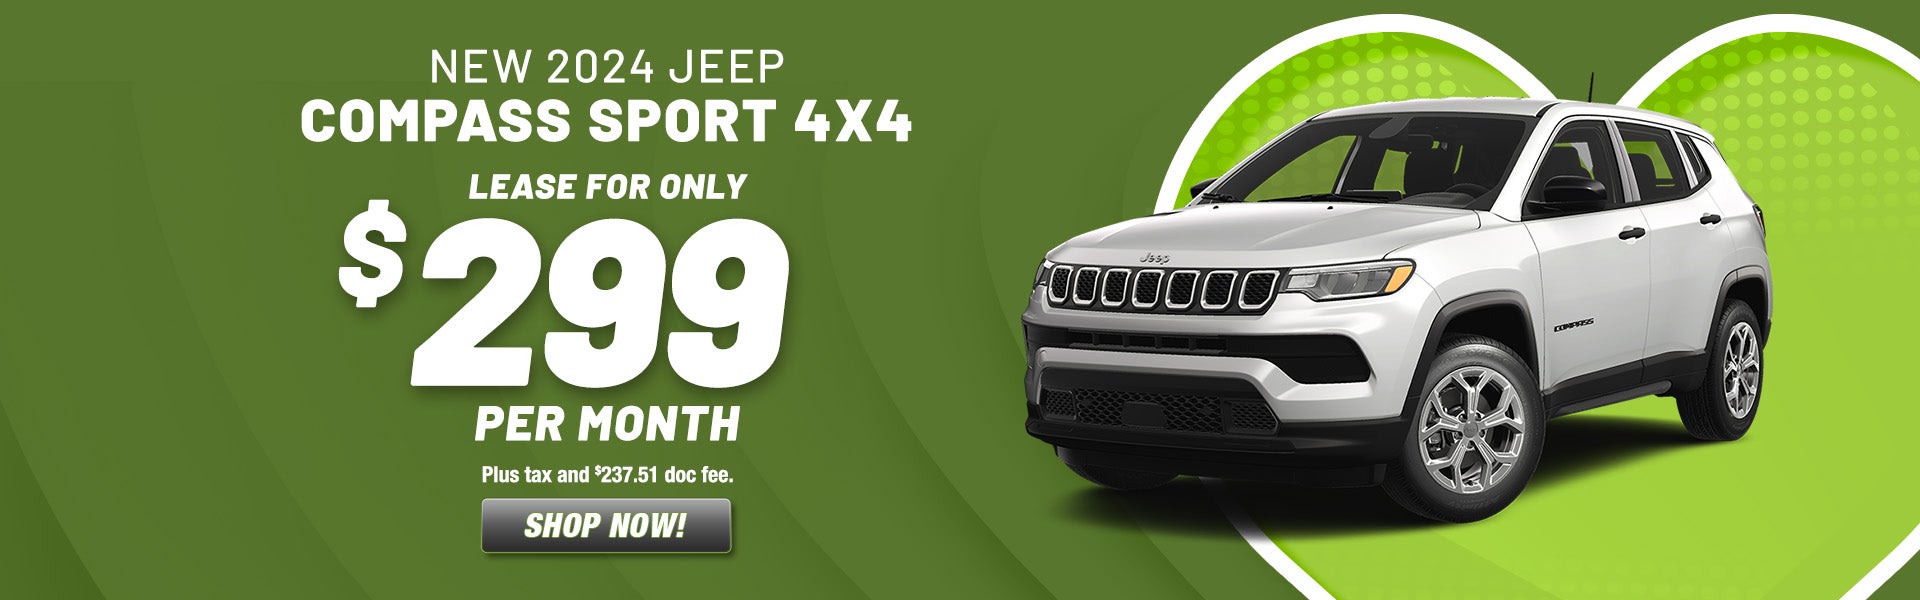 2024 Jeep Compass Sport Lease